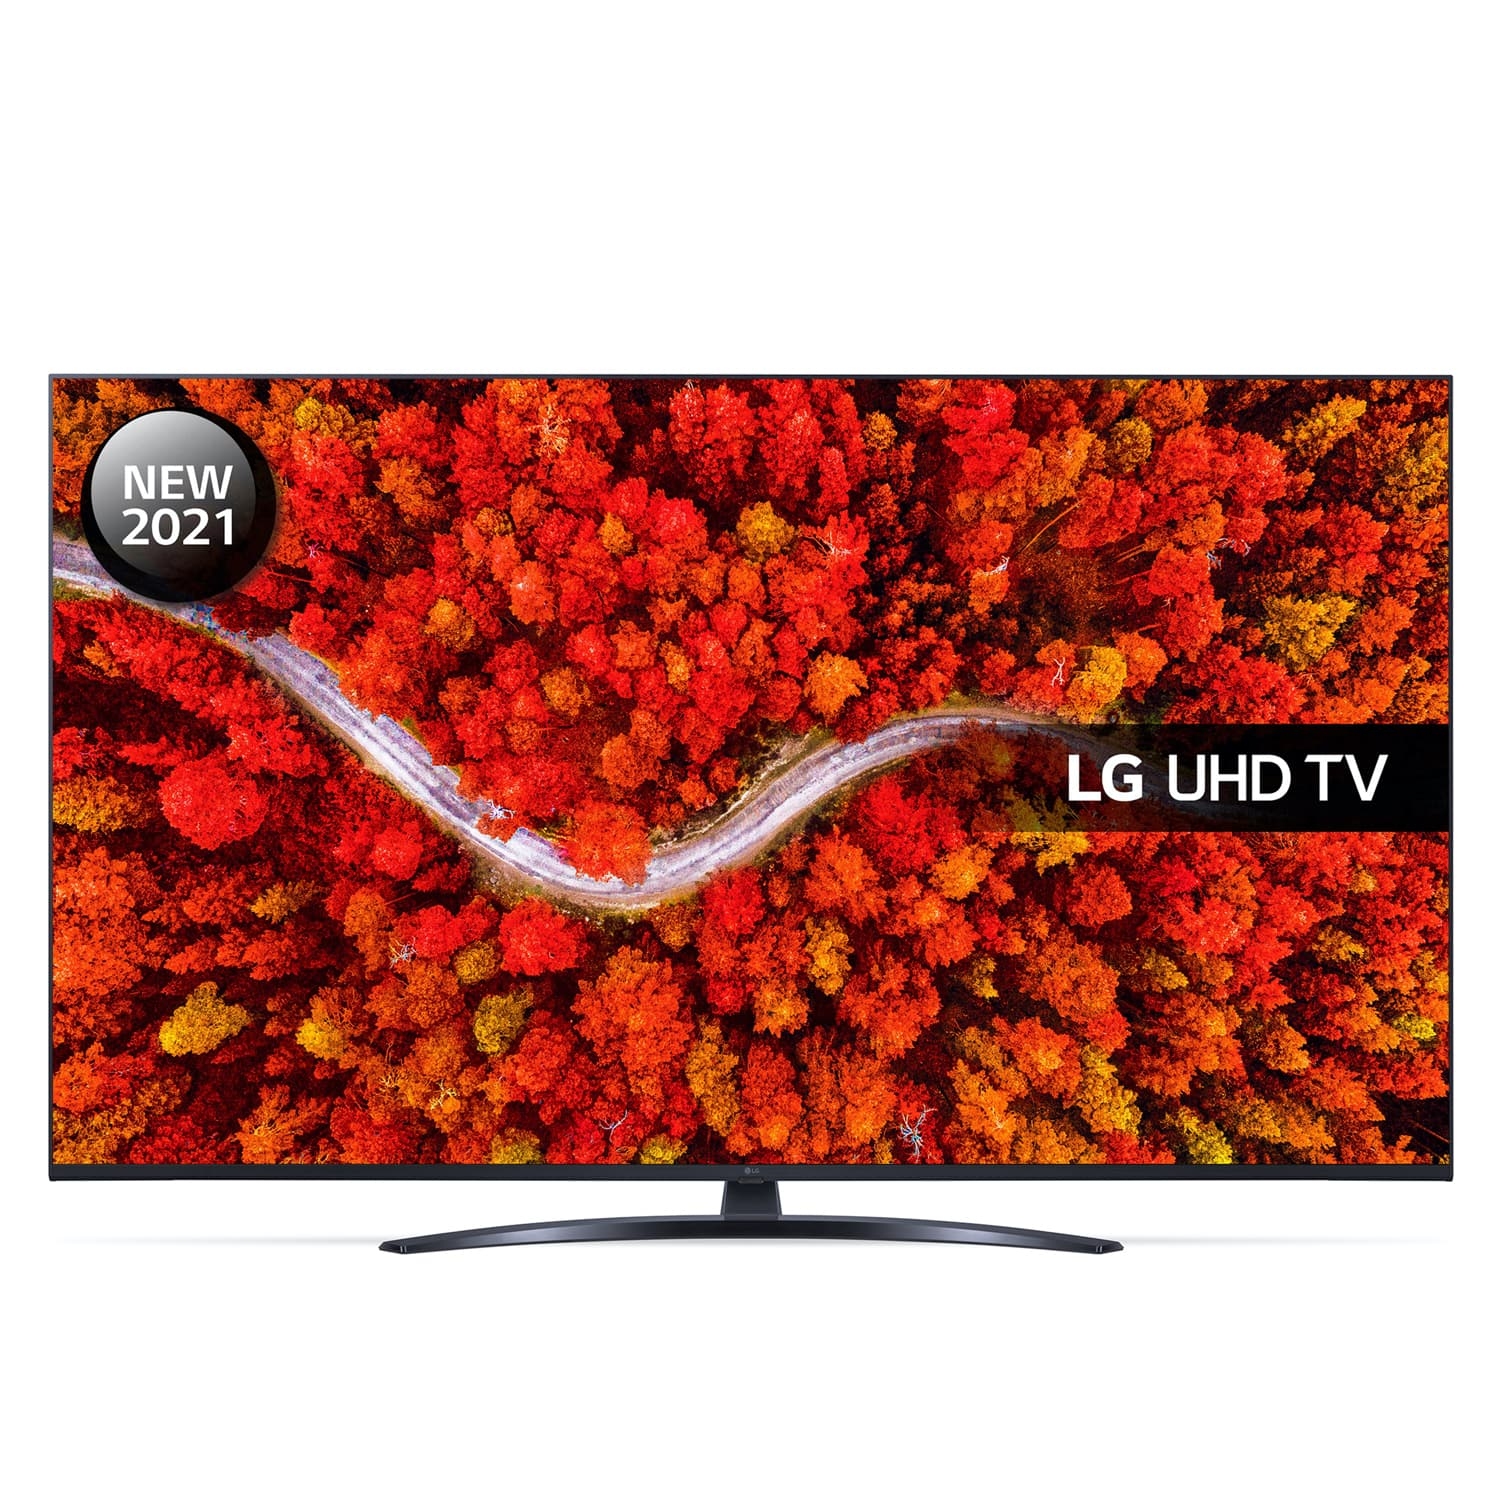 LG 55UP81006LA 55" 4K Ultra HD LED Smart TV with Freeview Play Freesat HD & Voice Assistants - 3